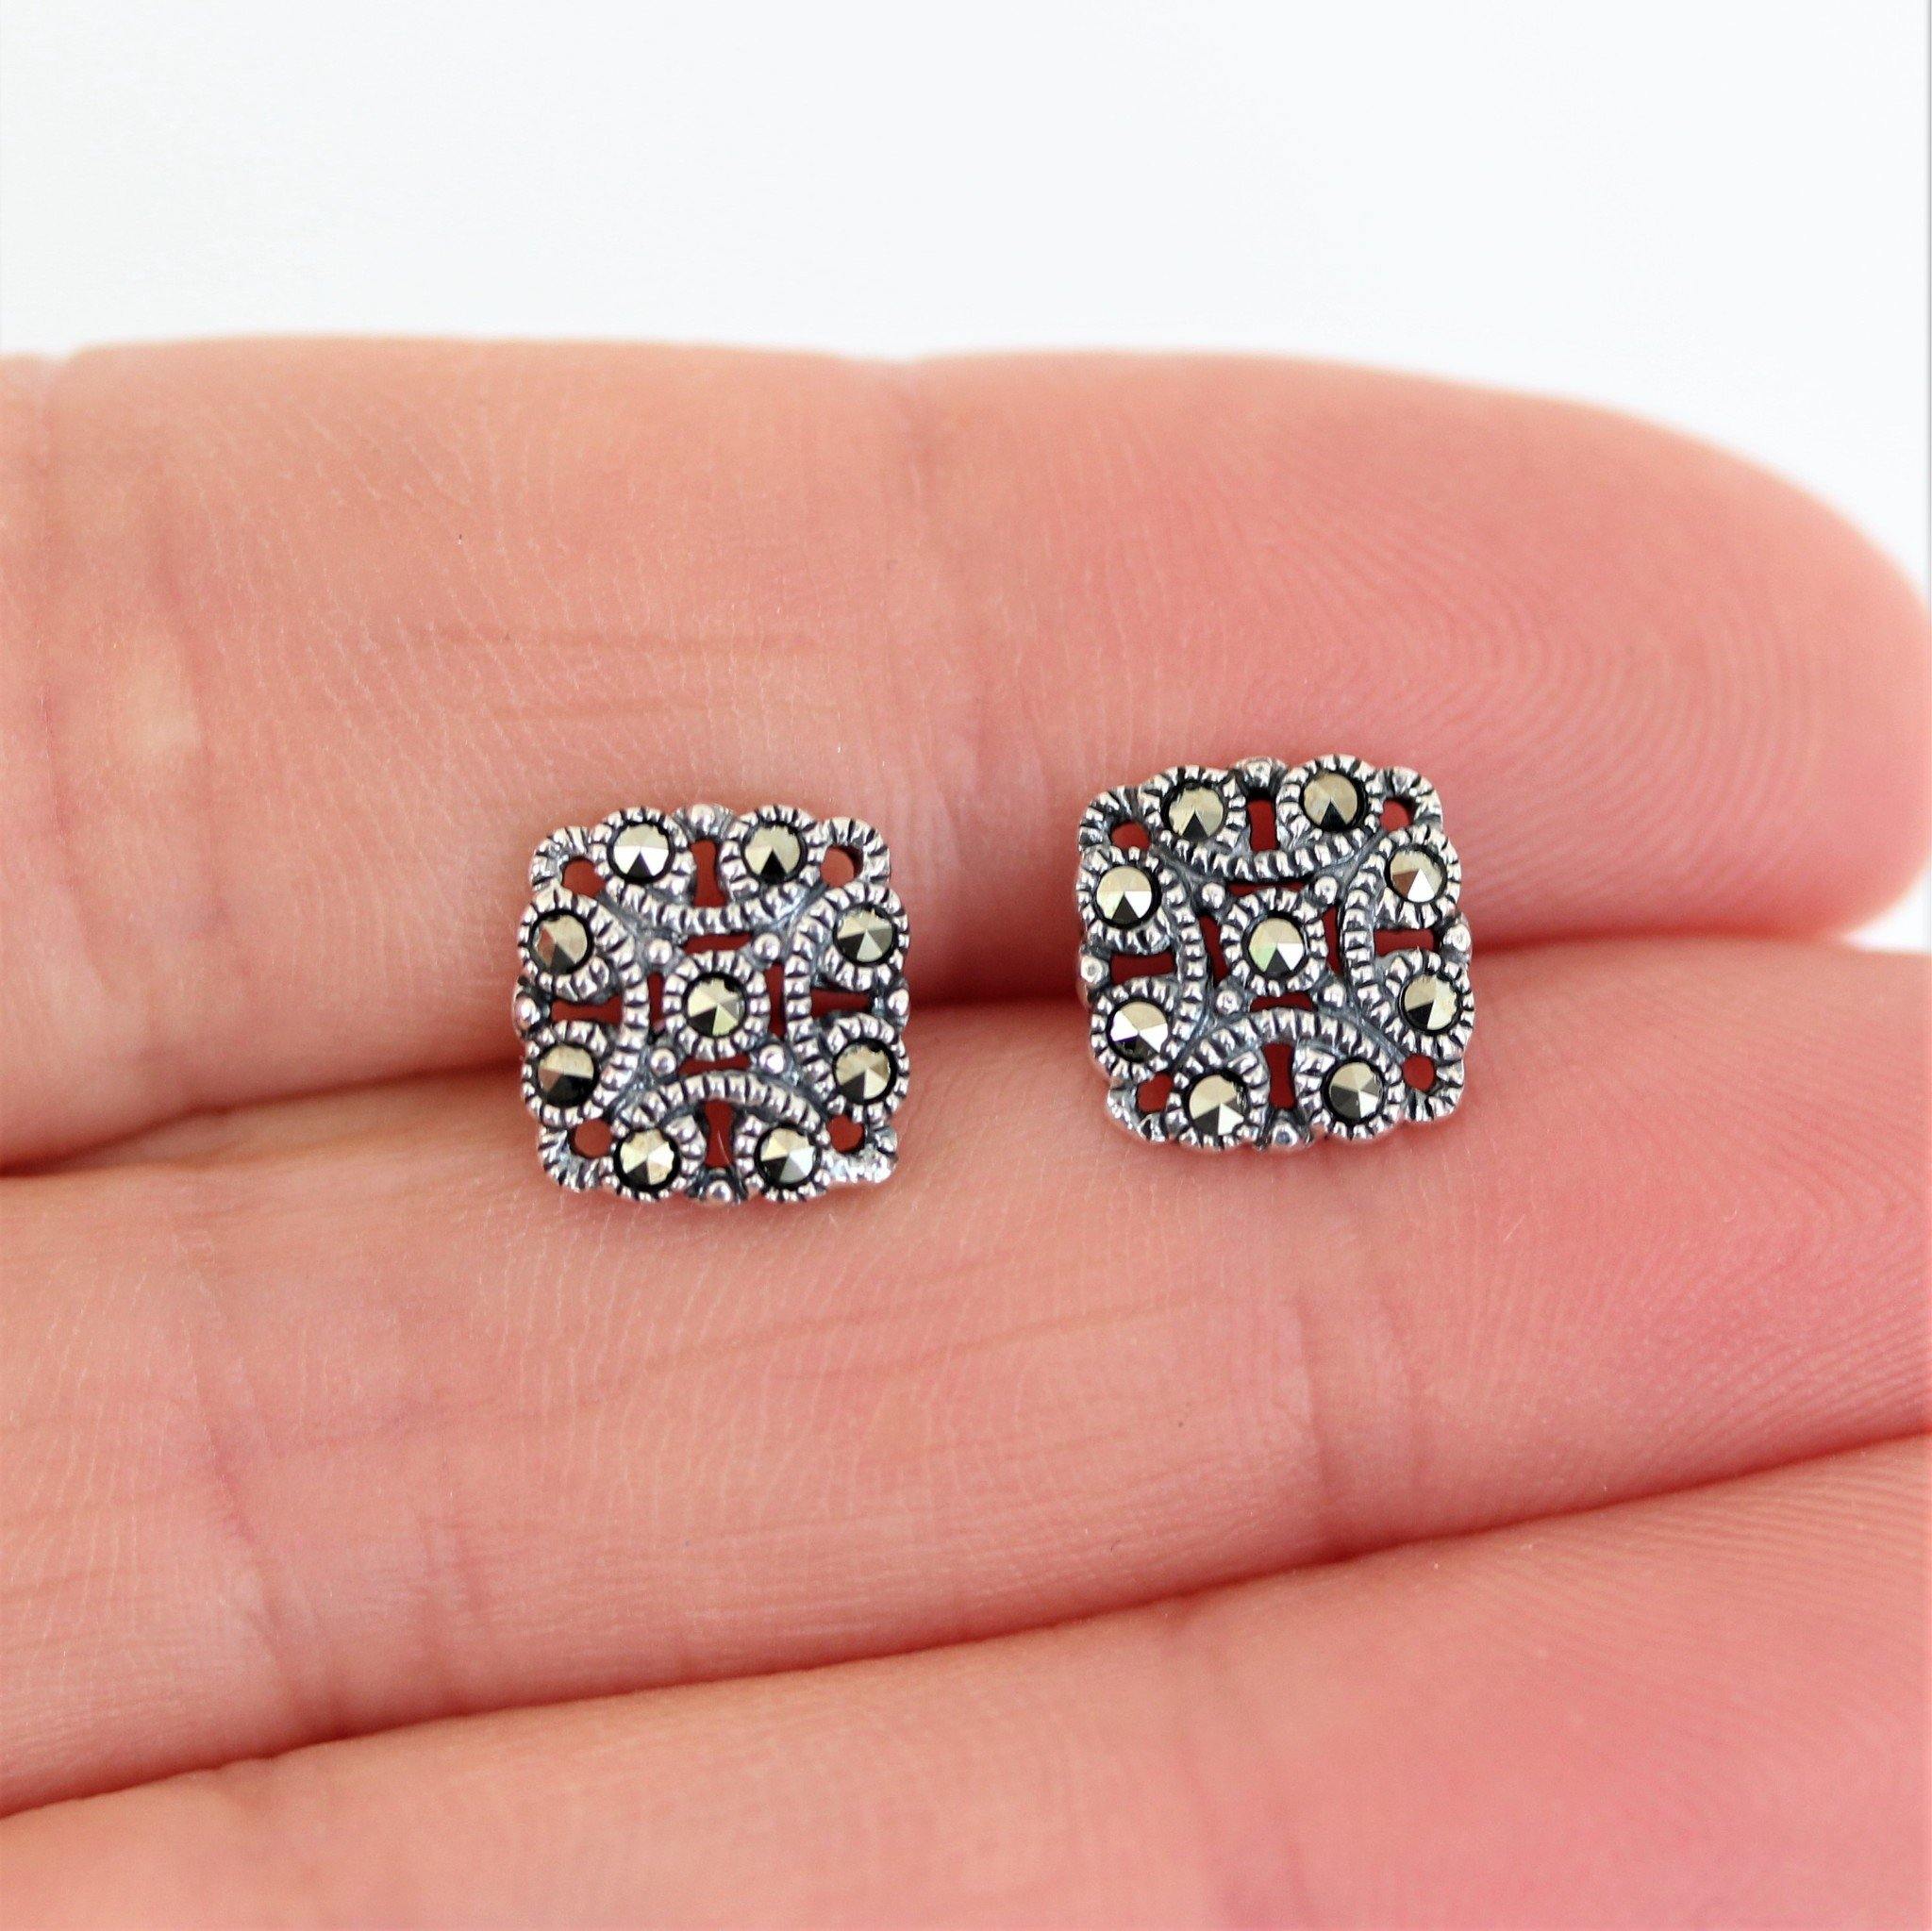 Sterling Silver Art Deco Vintage Style Marcasite 9mm Square Stud Earrings - STERLING SILVER DESIGNS